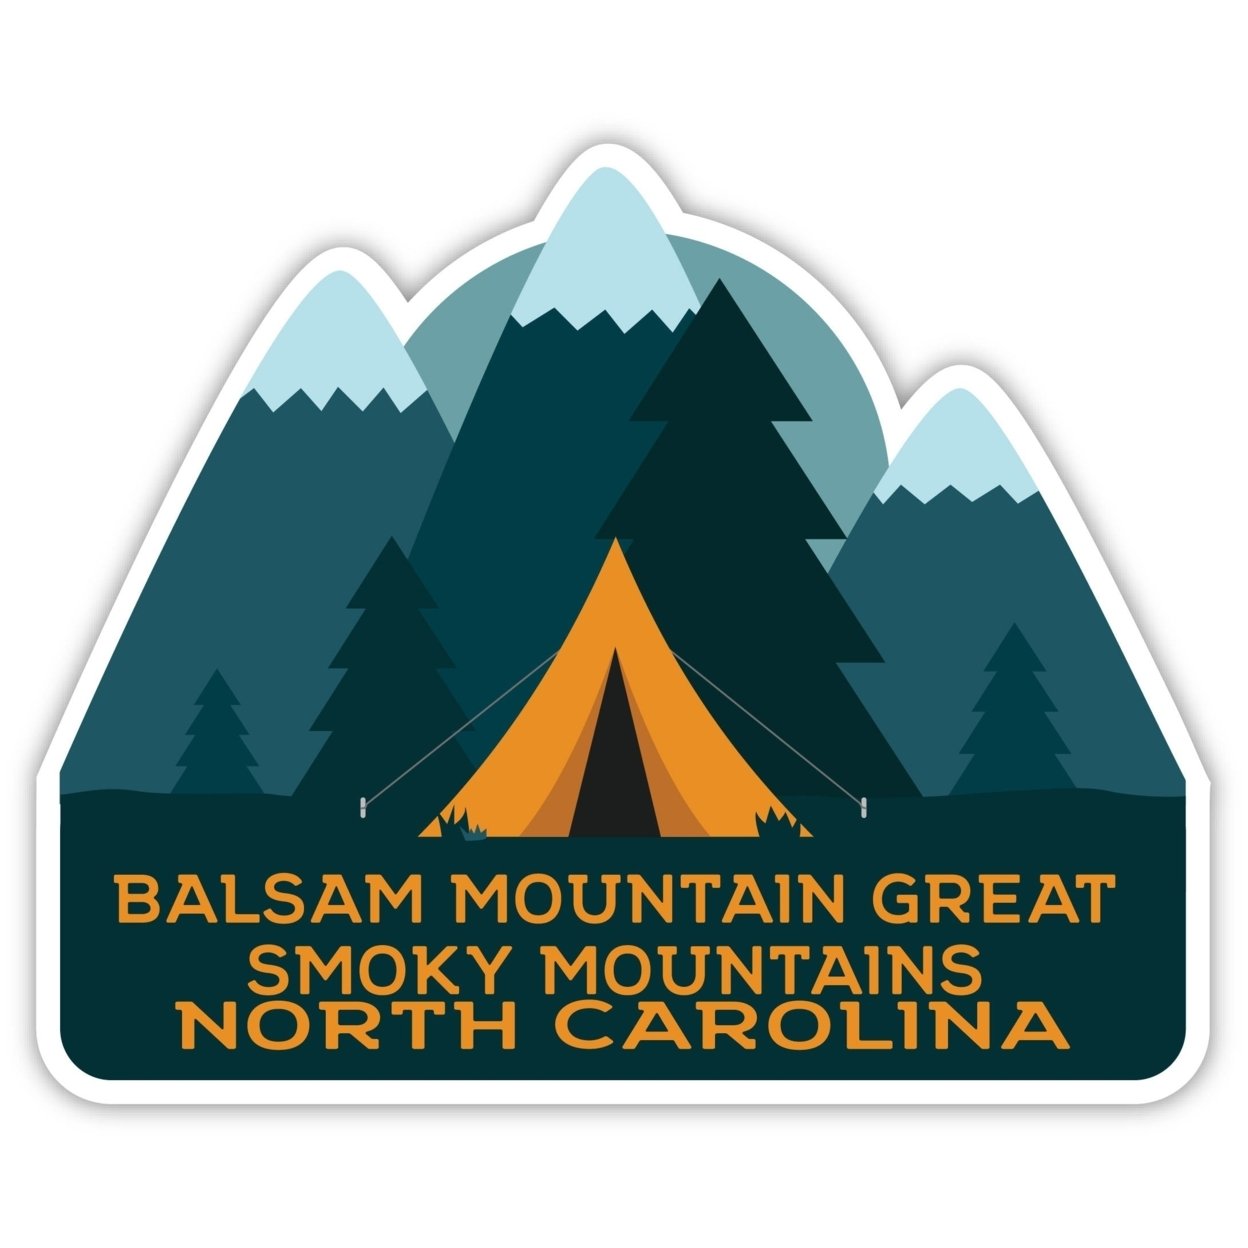 Balsam Mountain Great Smoky Mountains North Carolina Souvenir Decorative Stickers (Choose Theme And Size) - Single Unit, 12-Inch, Tent